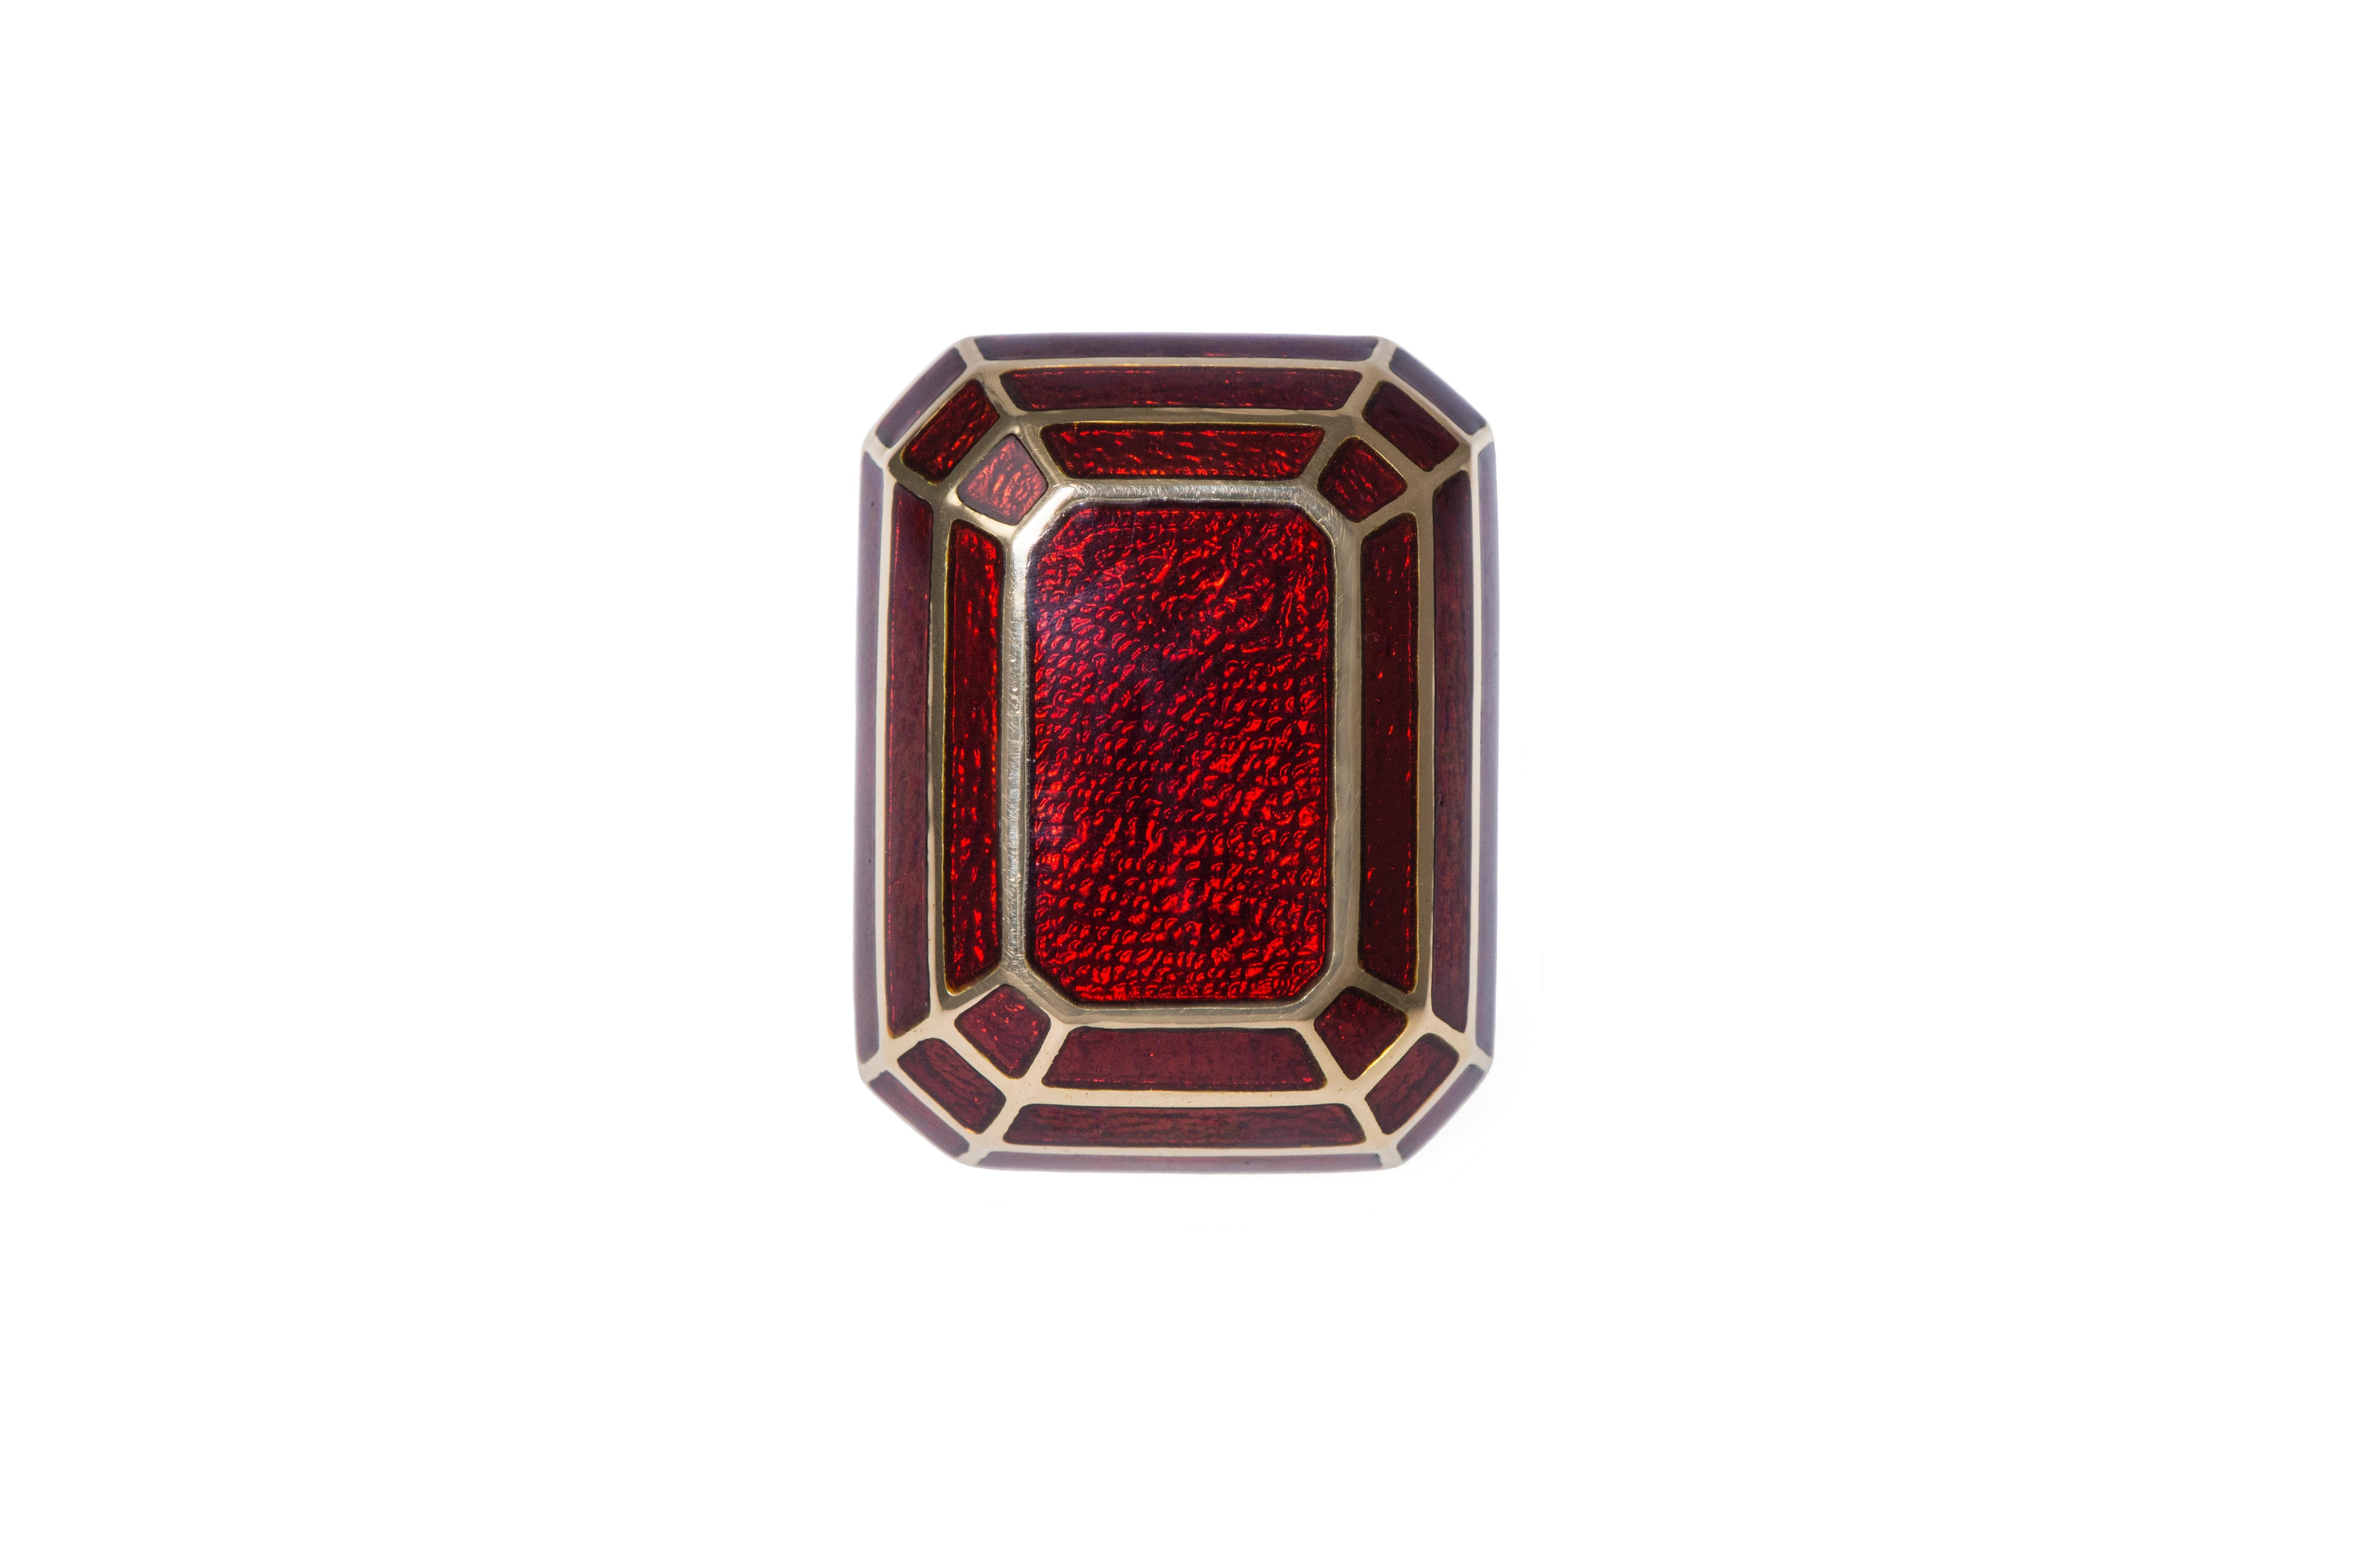 A red enamel and 18 karat gold ring, by David Webb, contemporary.

The ring measures a size 6. It is stamped copyright David Webb, 18k, and numbered FS63.
